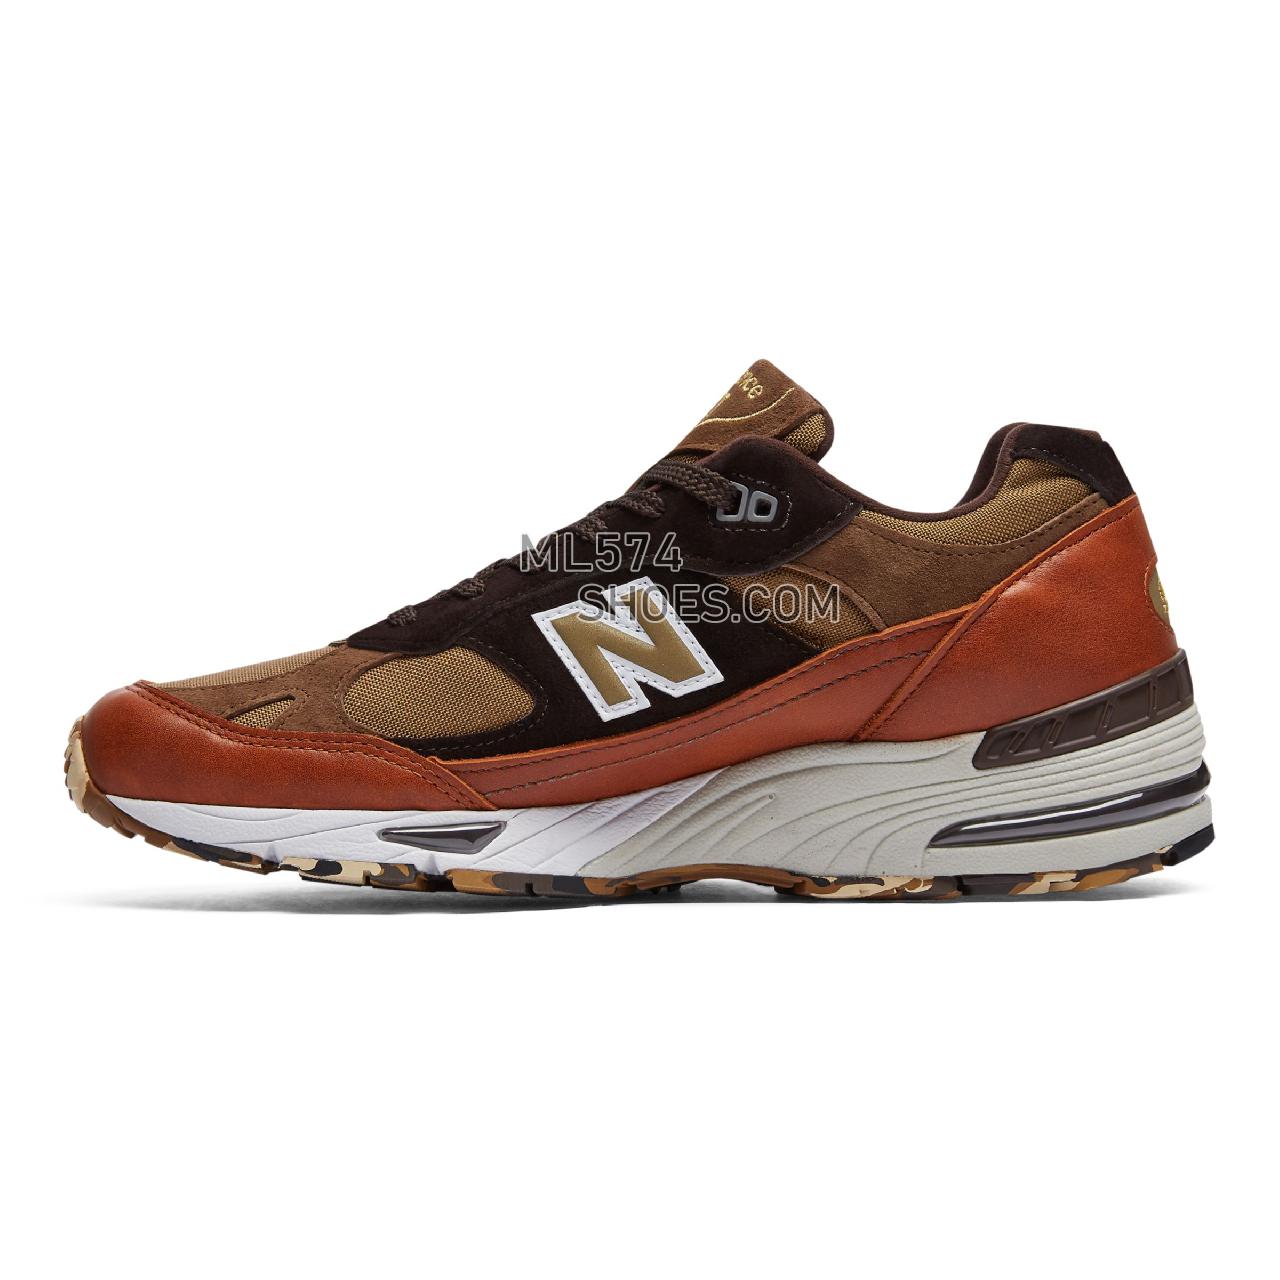 New Balance Made in UK 991 - Men's Made in UK 991 Classic ML991V1-27396-M - Burnt Orange with Brown and Light Brown - M991SOP